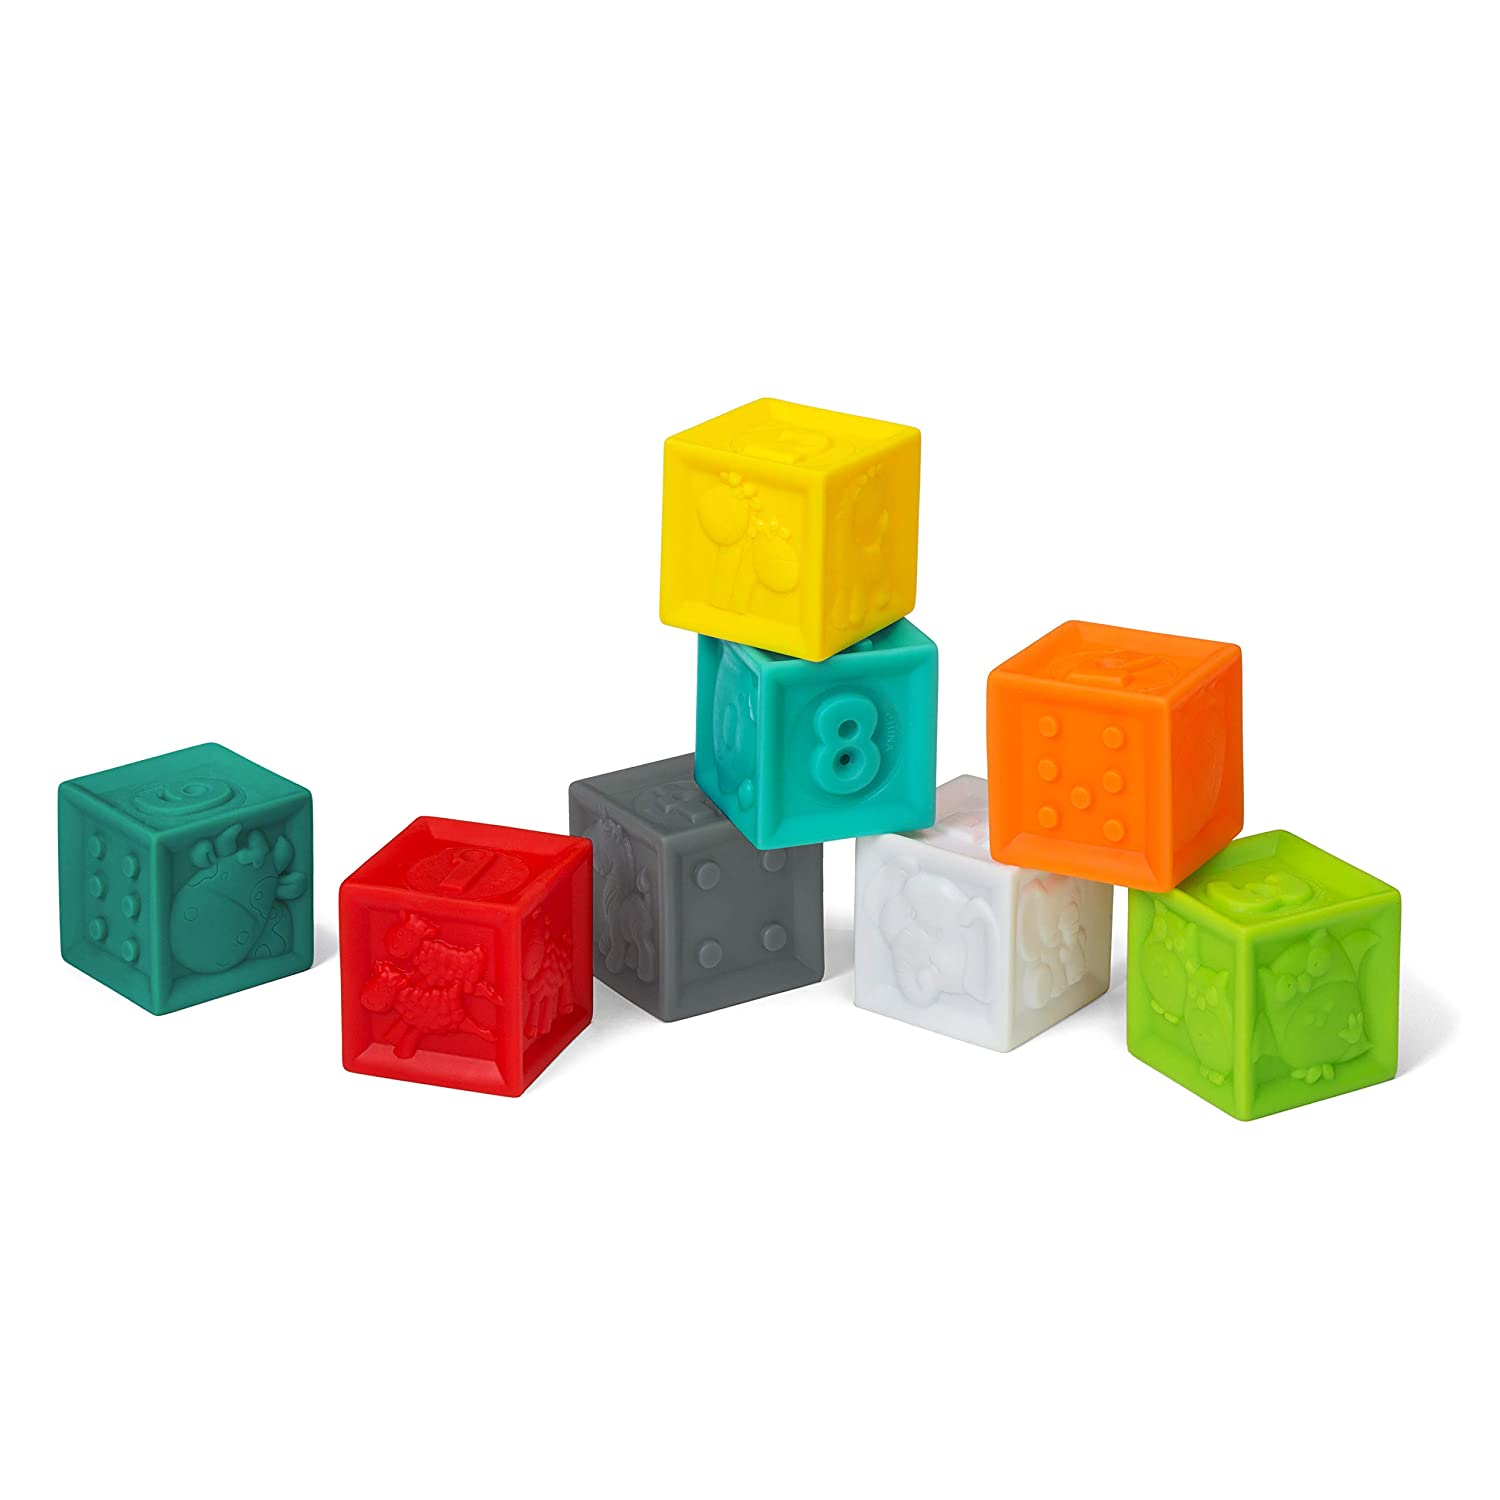 7 Best Baby Blocks 2022 - Buying Guide & Reviews 1